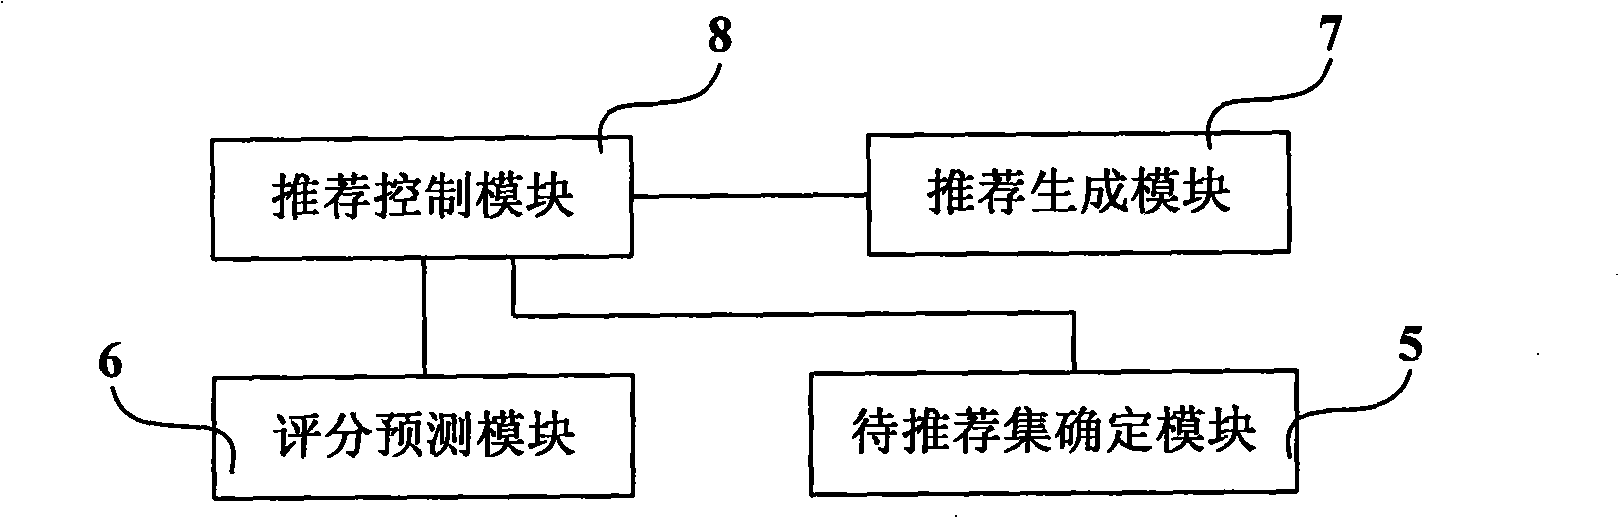 Recommendation system and method